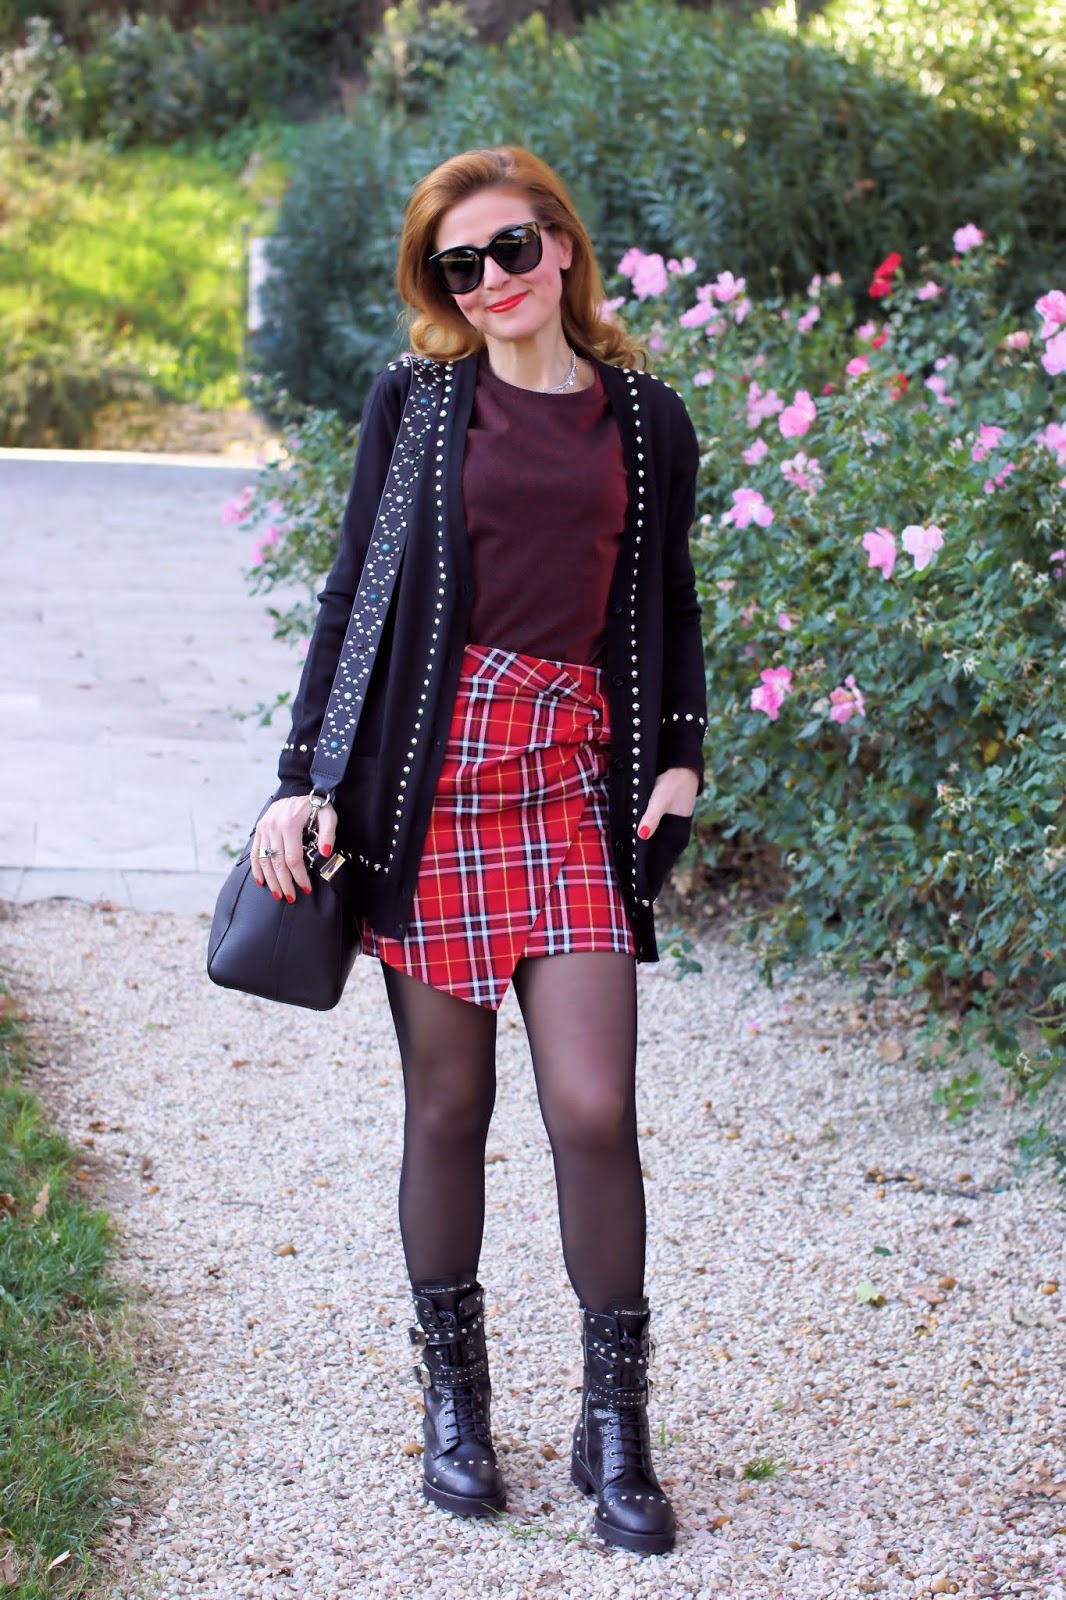 Mini skirt, puffy sleeves top and combat boots on Fashion and Cookies fashion blog, fashion blogger style